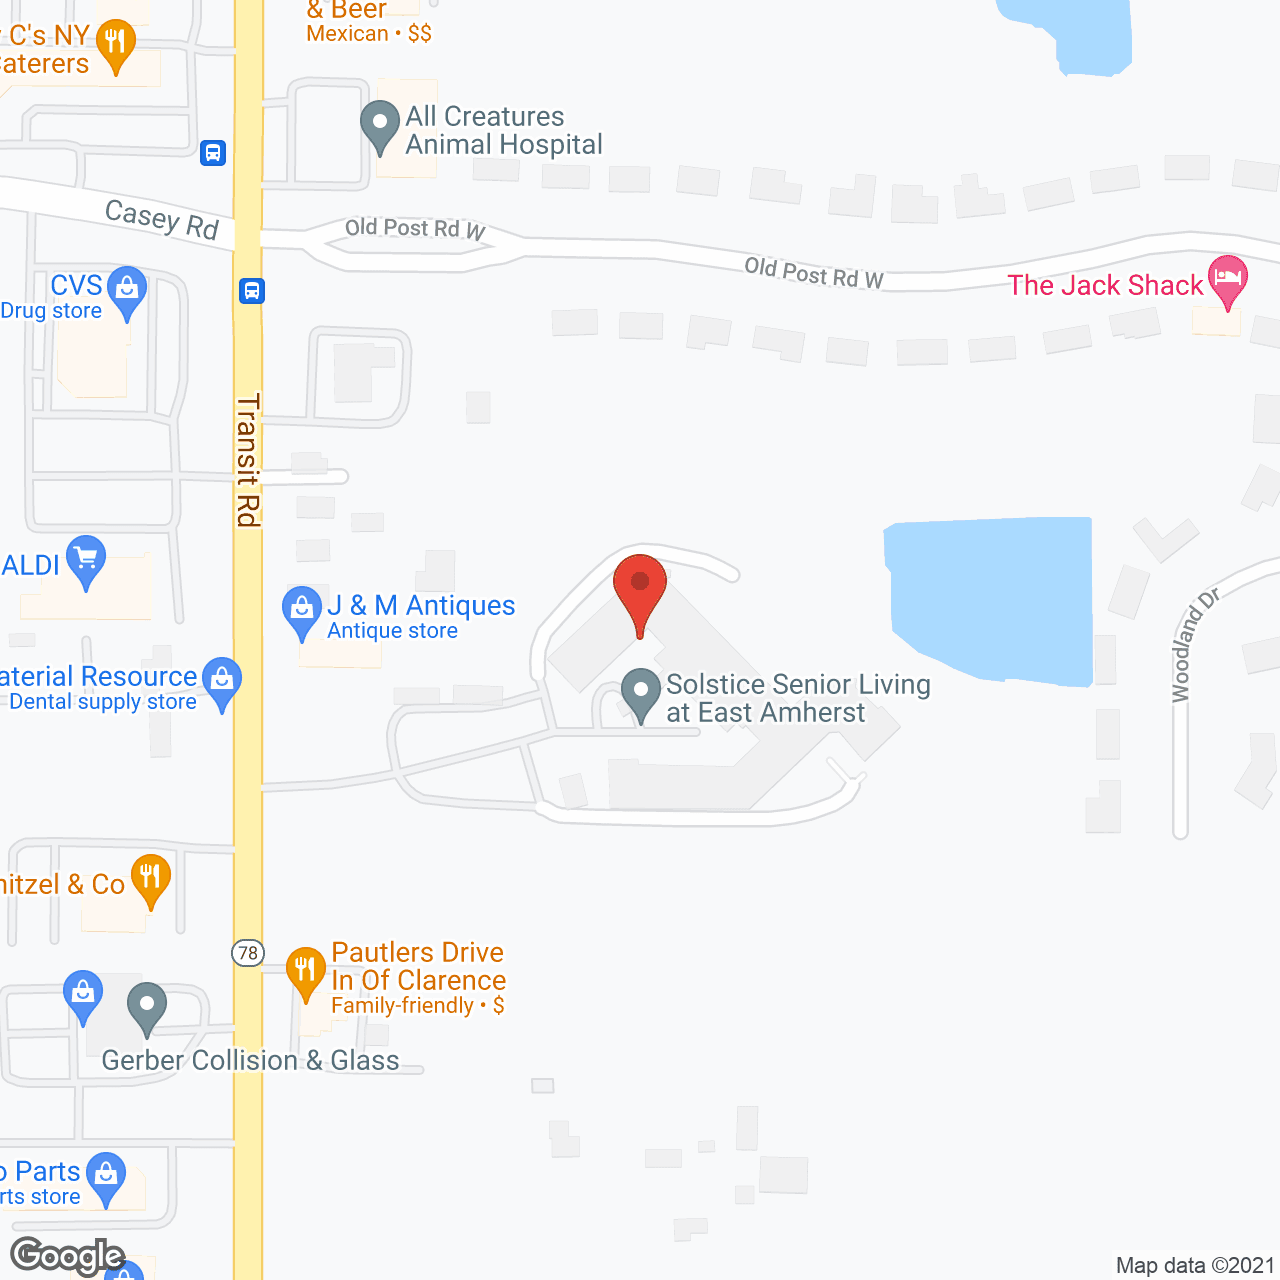 Solstice Senior Living at East Amherst in google map